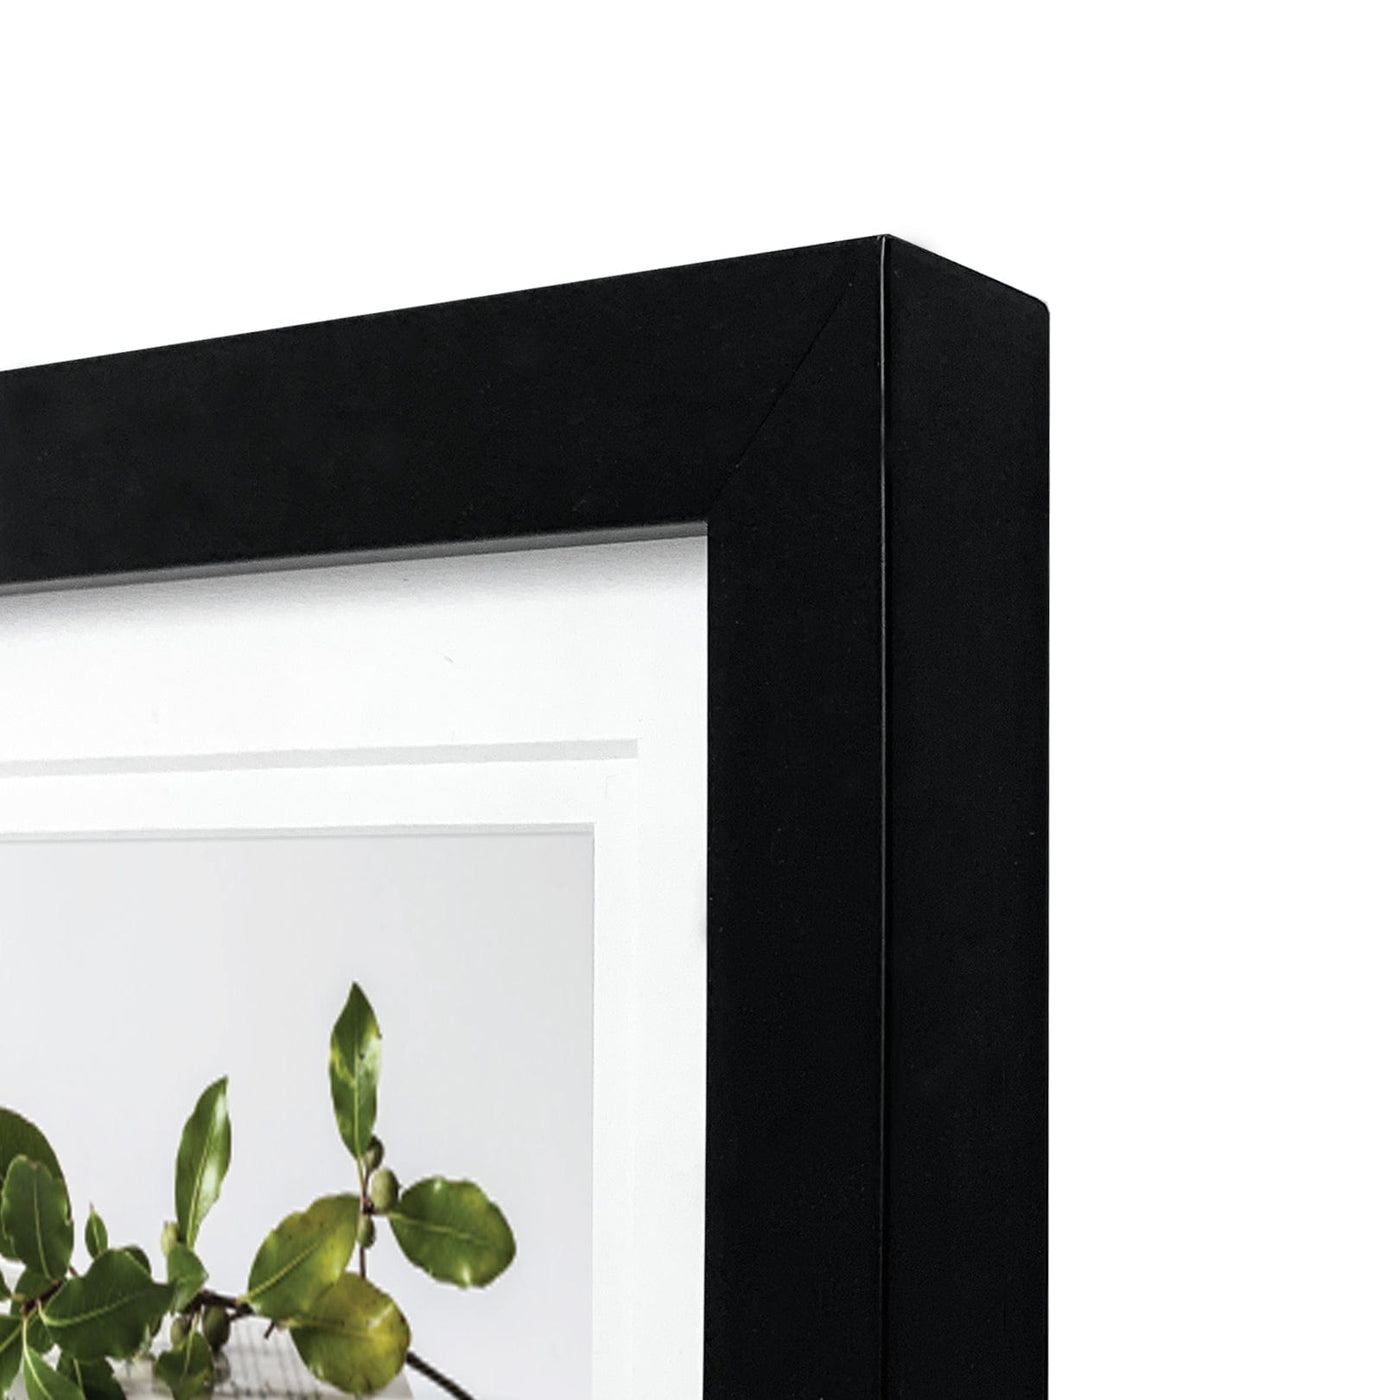 Deluxe Gallery Photo Wall Frame Set H - 5 Frames from our Australian Made Picture Frames collection by Profile Products Australia